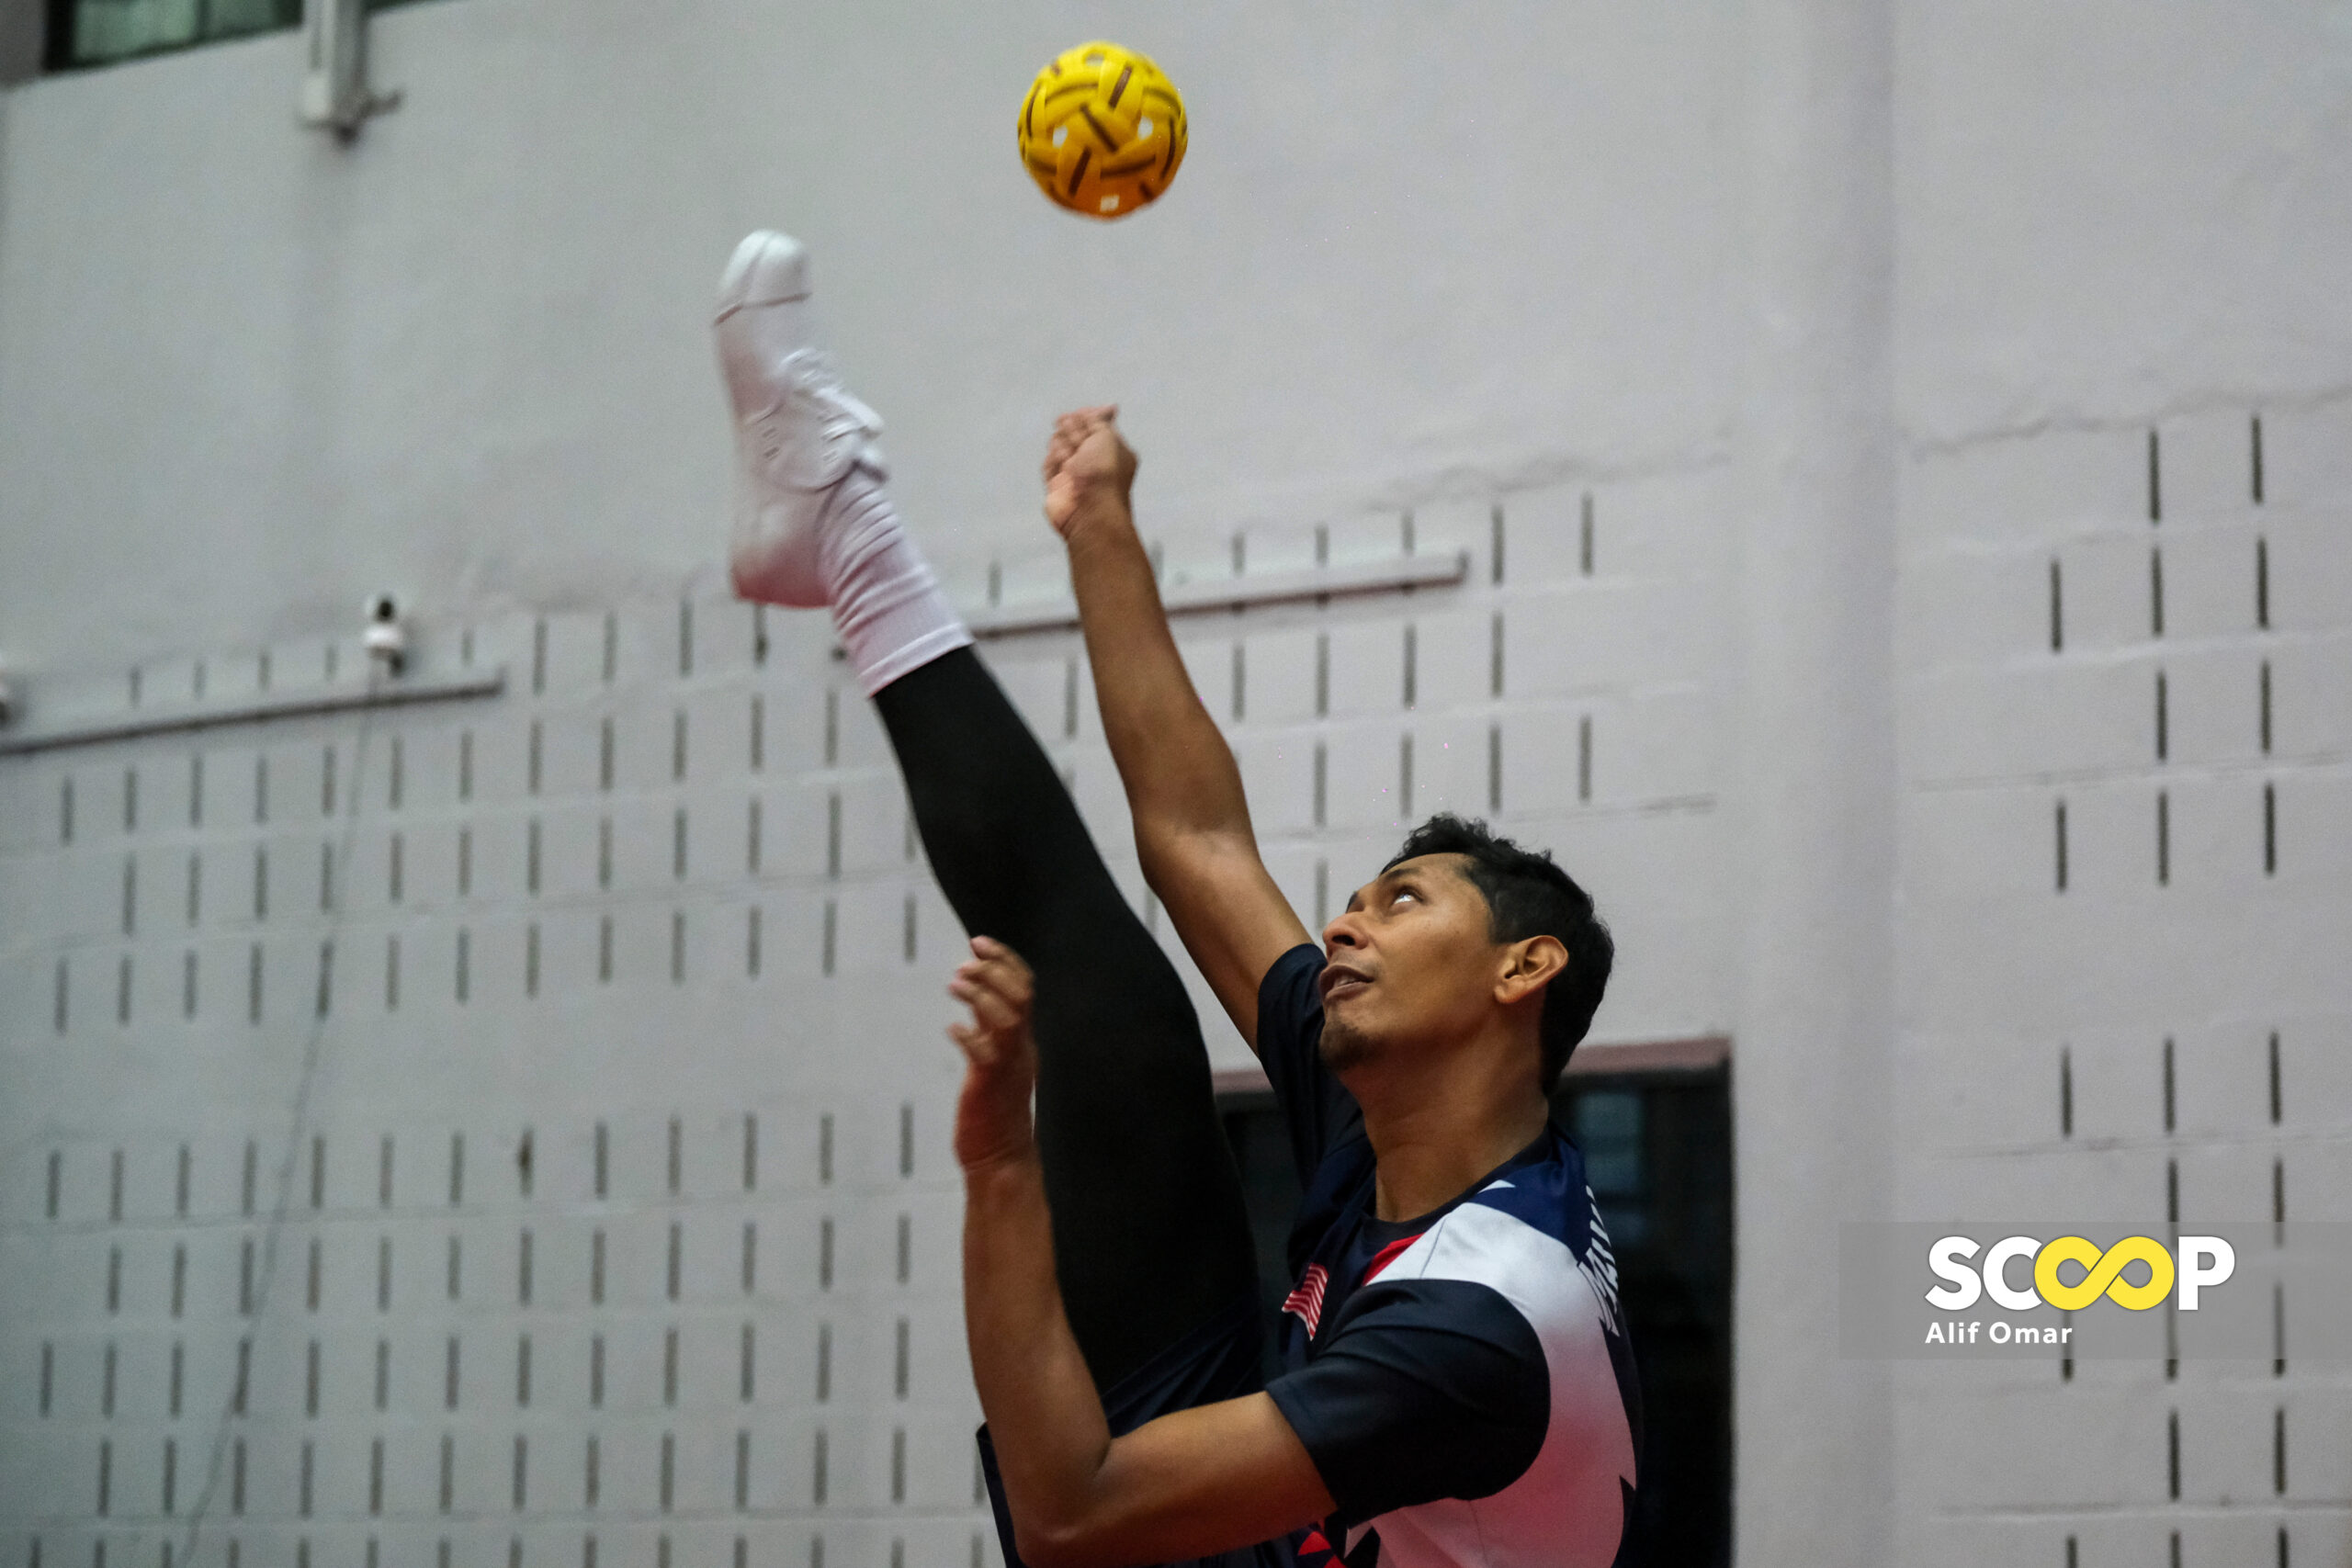 Malaysia ready for all comers ahead of Sepak Takraw World Cup draw